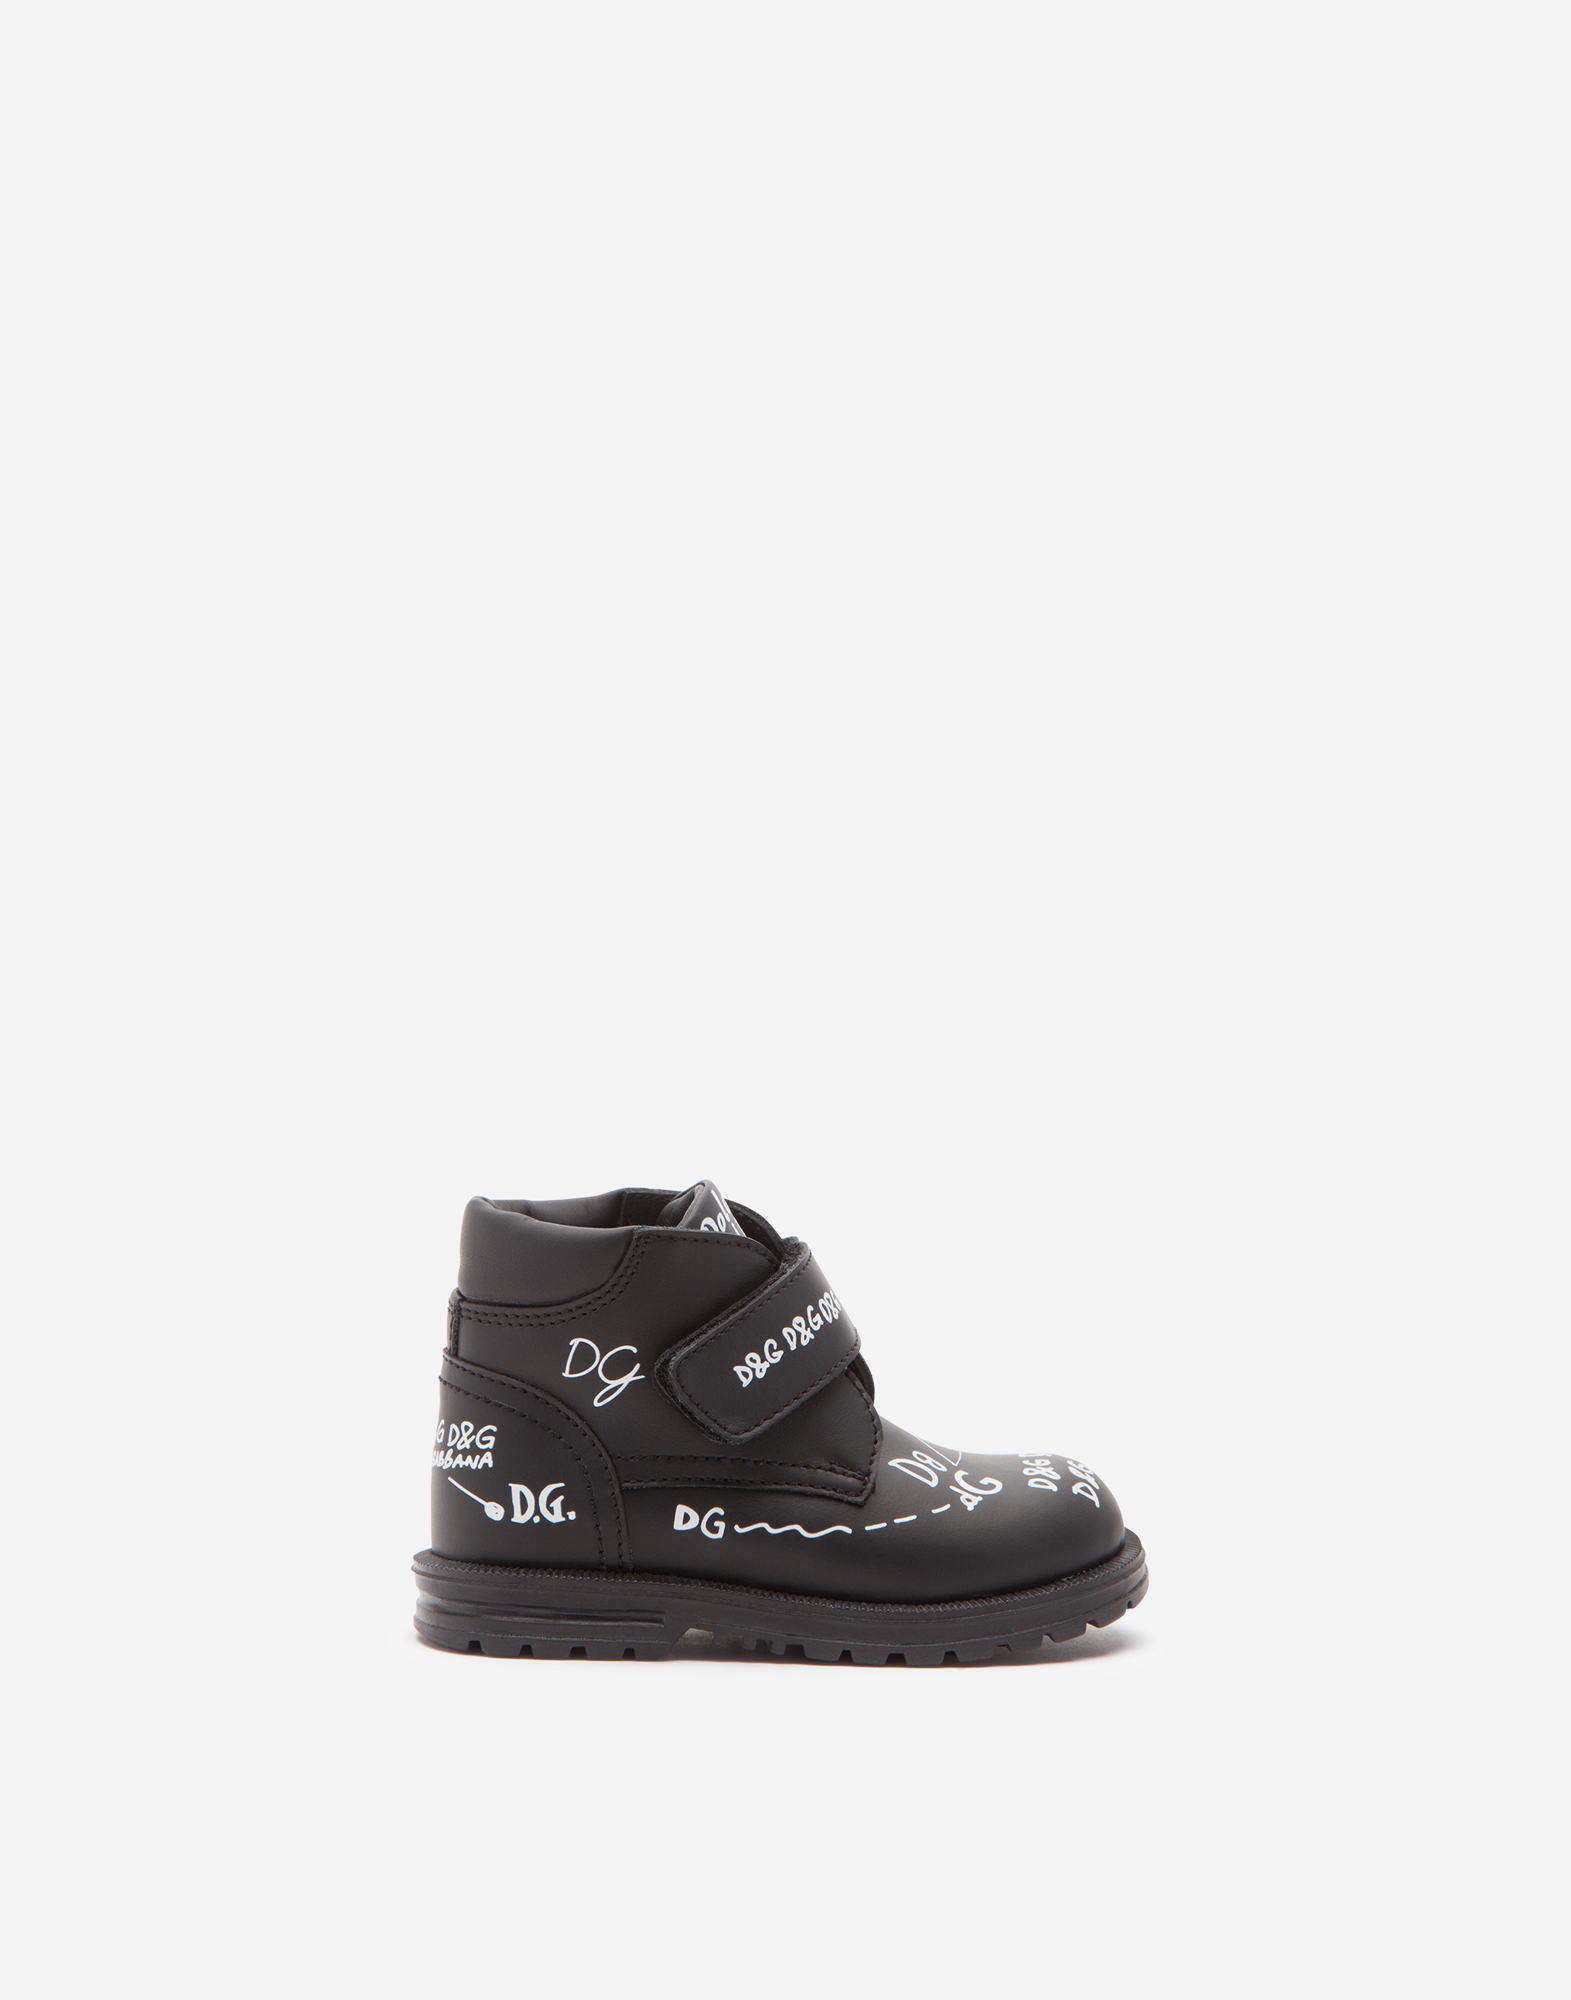 Dolce & Gabbana Babies' Calfskin Ankle Boots With Logo Print